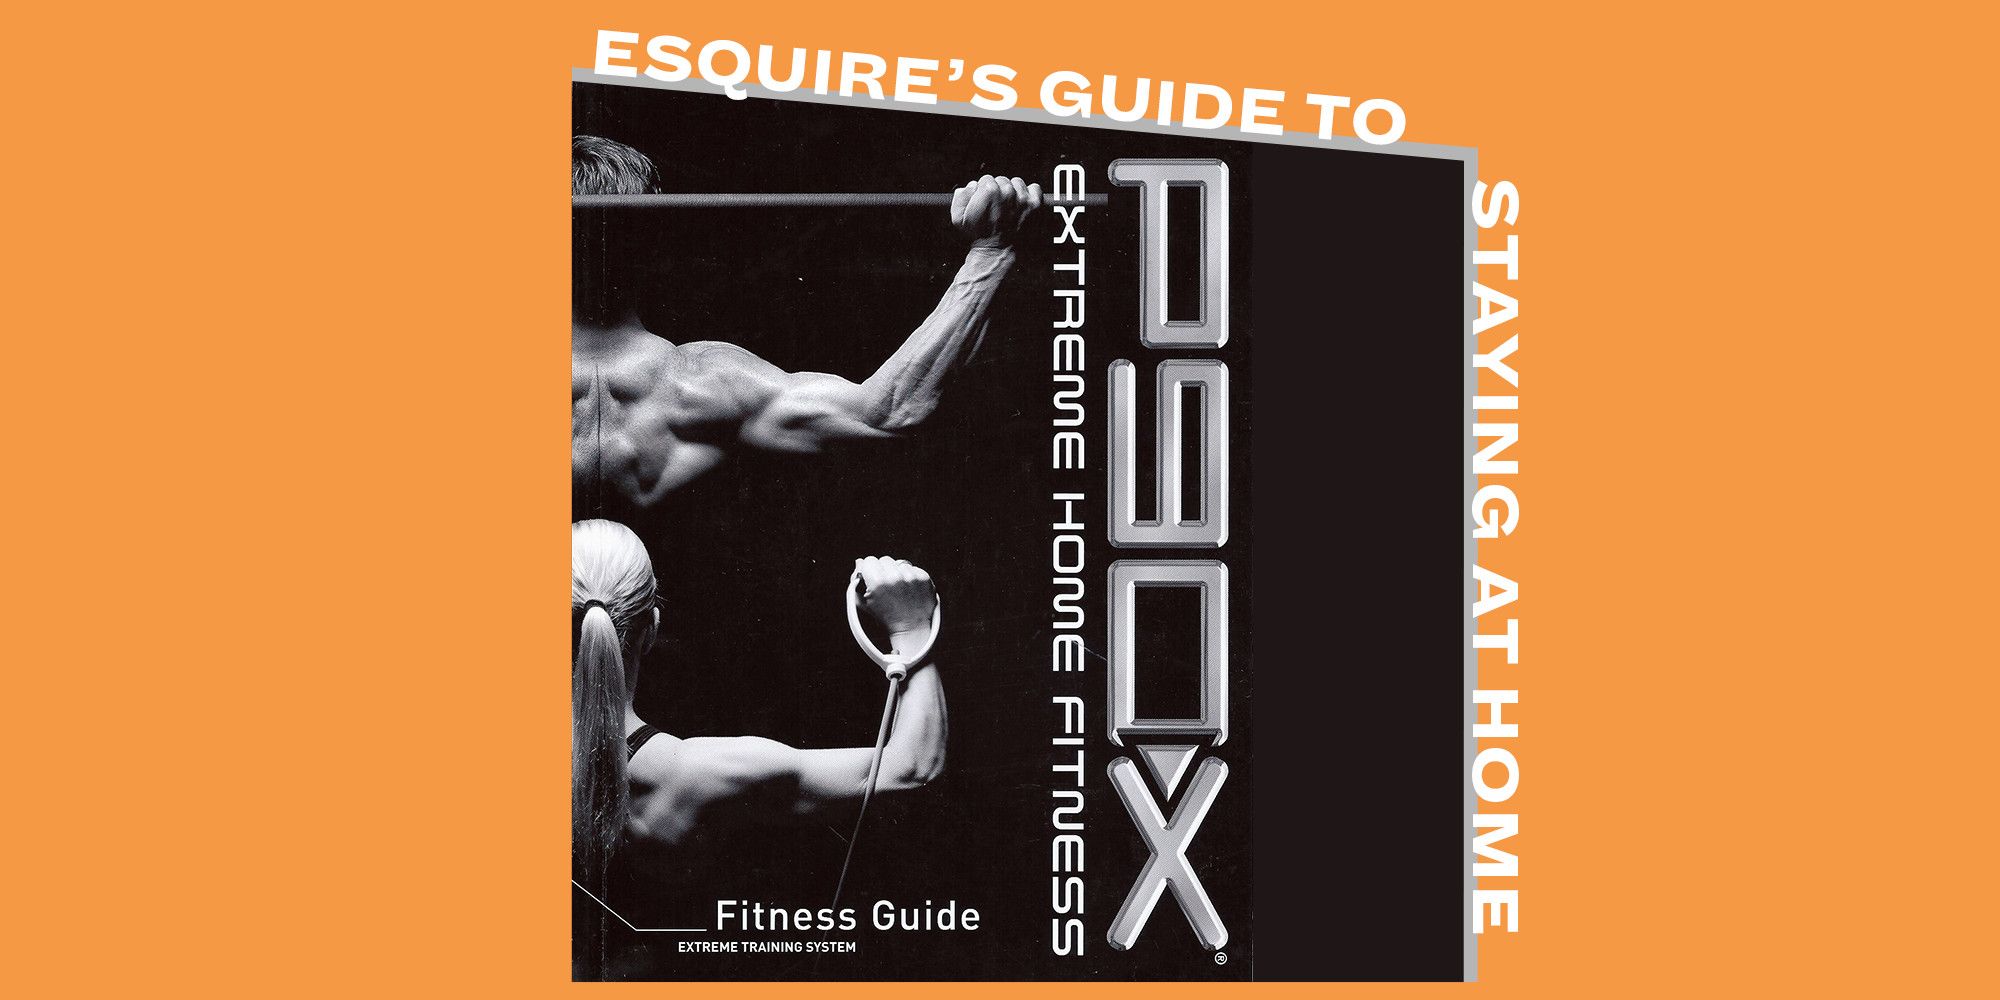 p90x chest and back workout guide